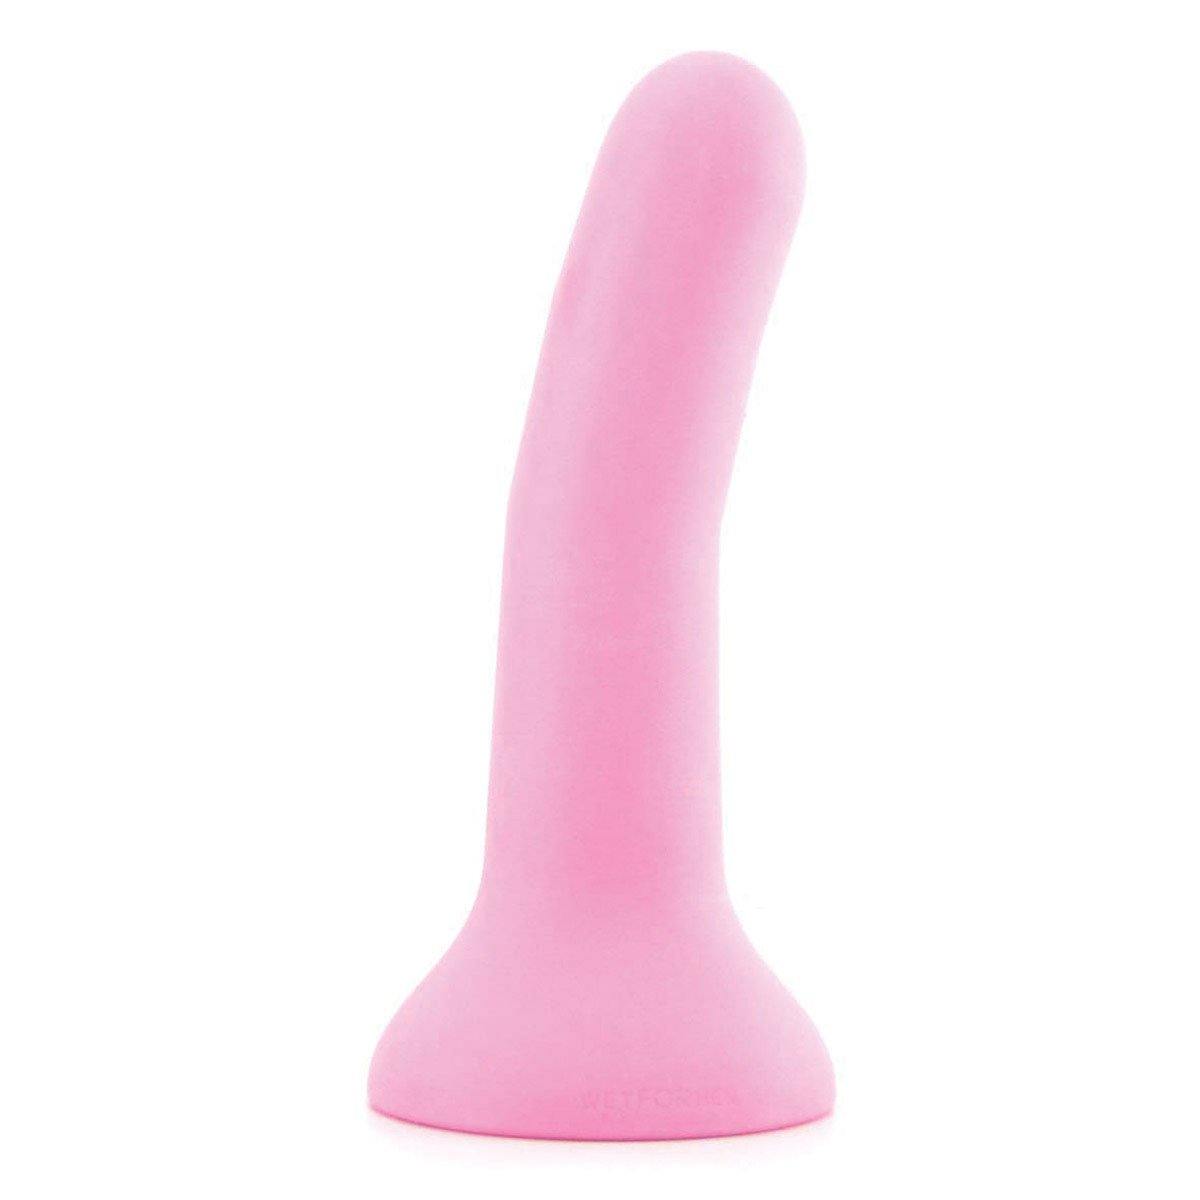 Wet for Her Five Jules (M) - Buy At Luxury Toy X - Free 3-Day Shipping